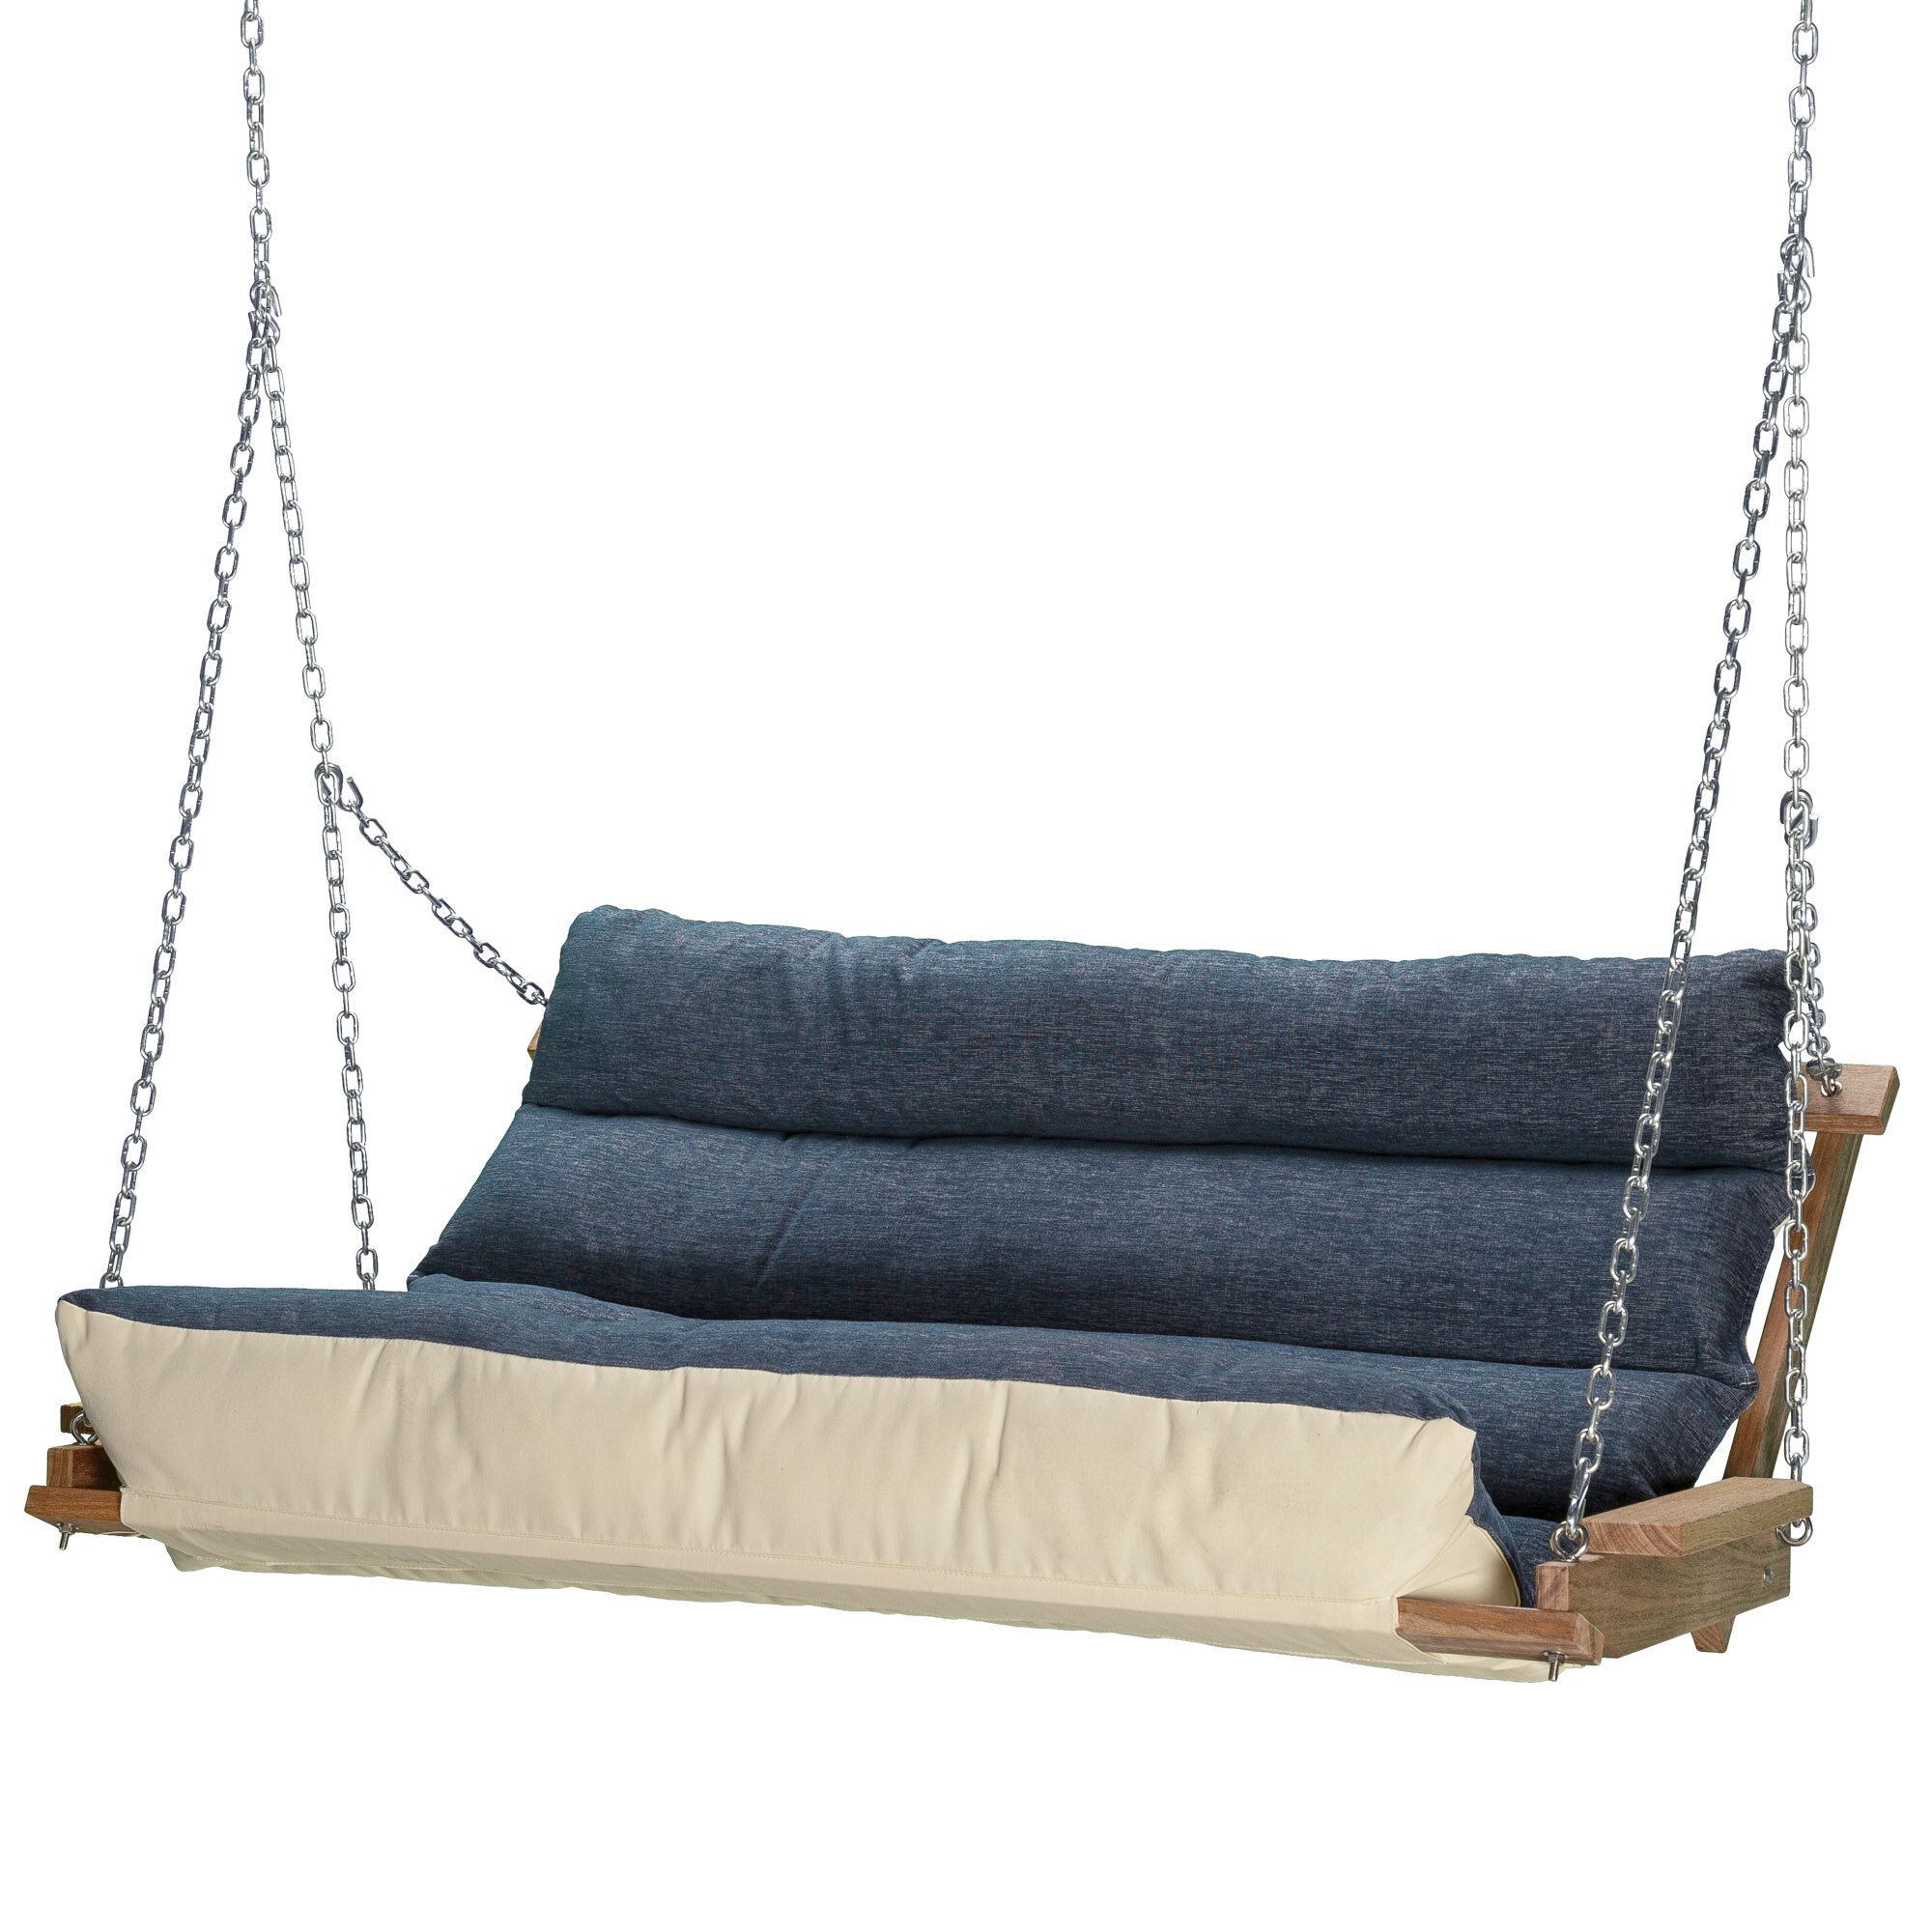 Carr Deluxe Cushion Porch Swing Throughout Deluxe Cushion Sunbrella Porch Swings (View 4 of 25)